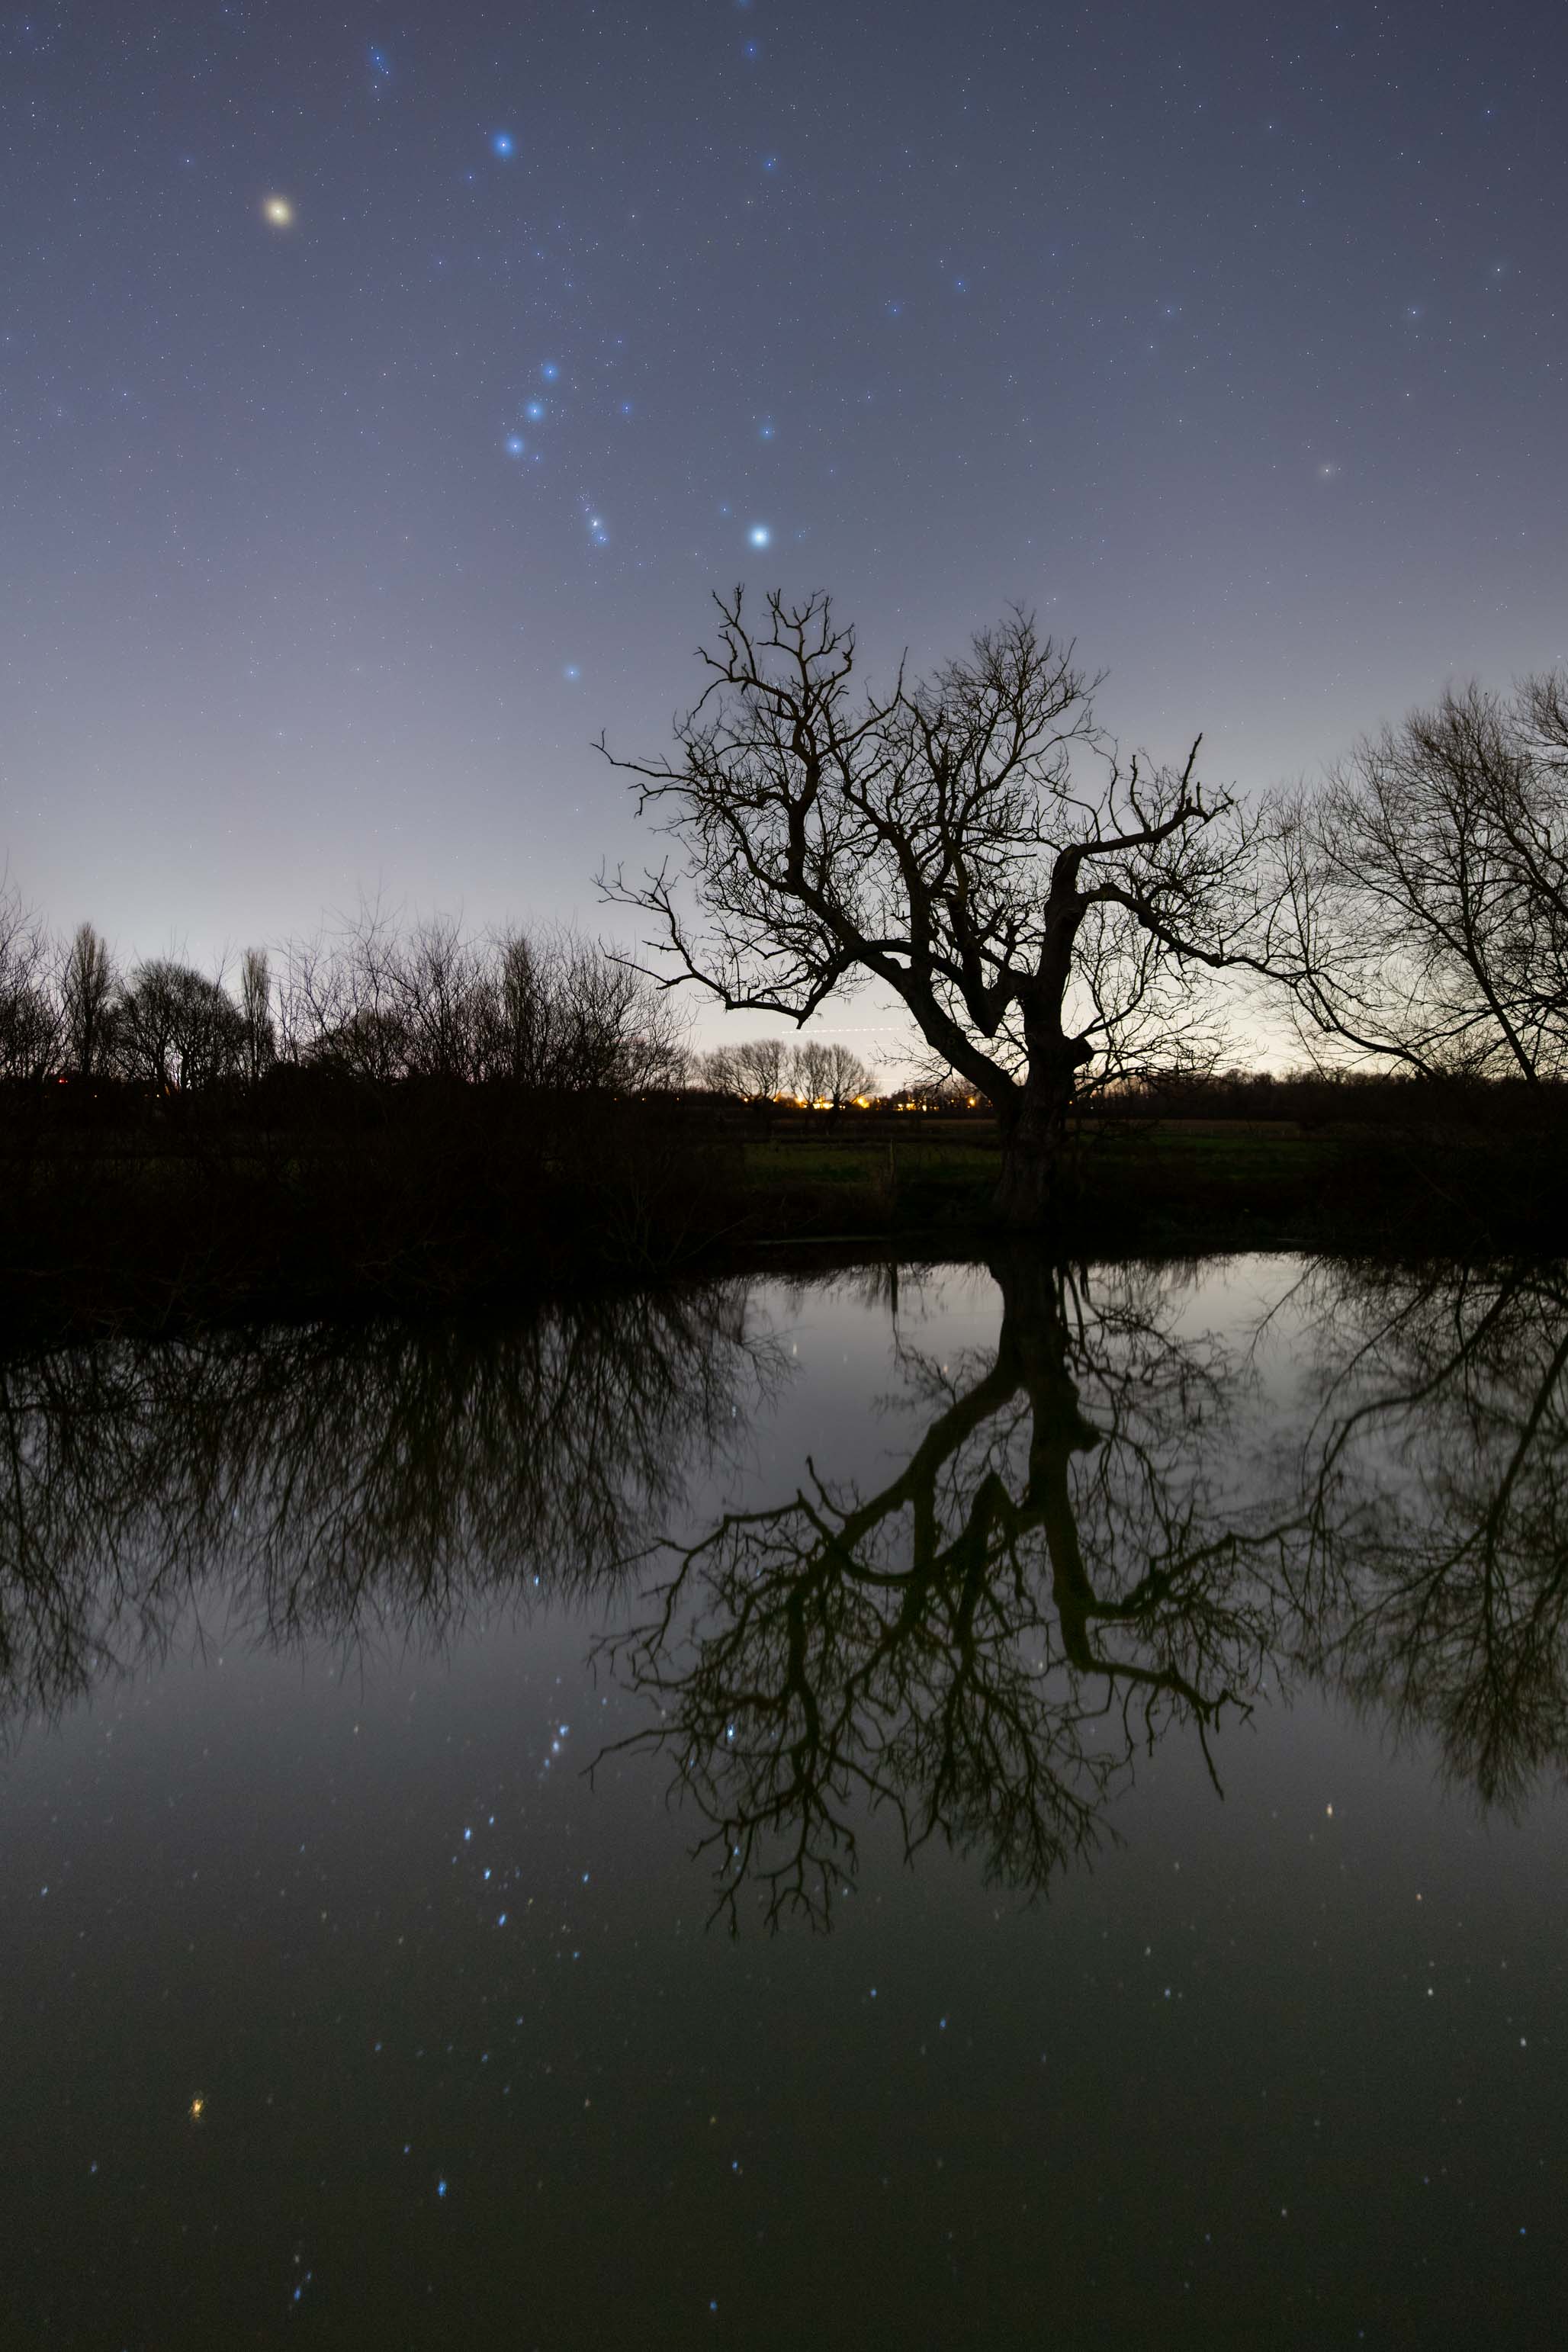 After taking the star trail image here, I knew I wanted to come back and get a still of Orion reflected in the water, which I eventually got round to in January 2023. The star glow filter has really helped accentuate the colours in the stars, especially the Red Betelgeuse.